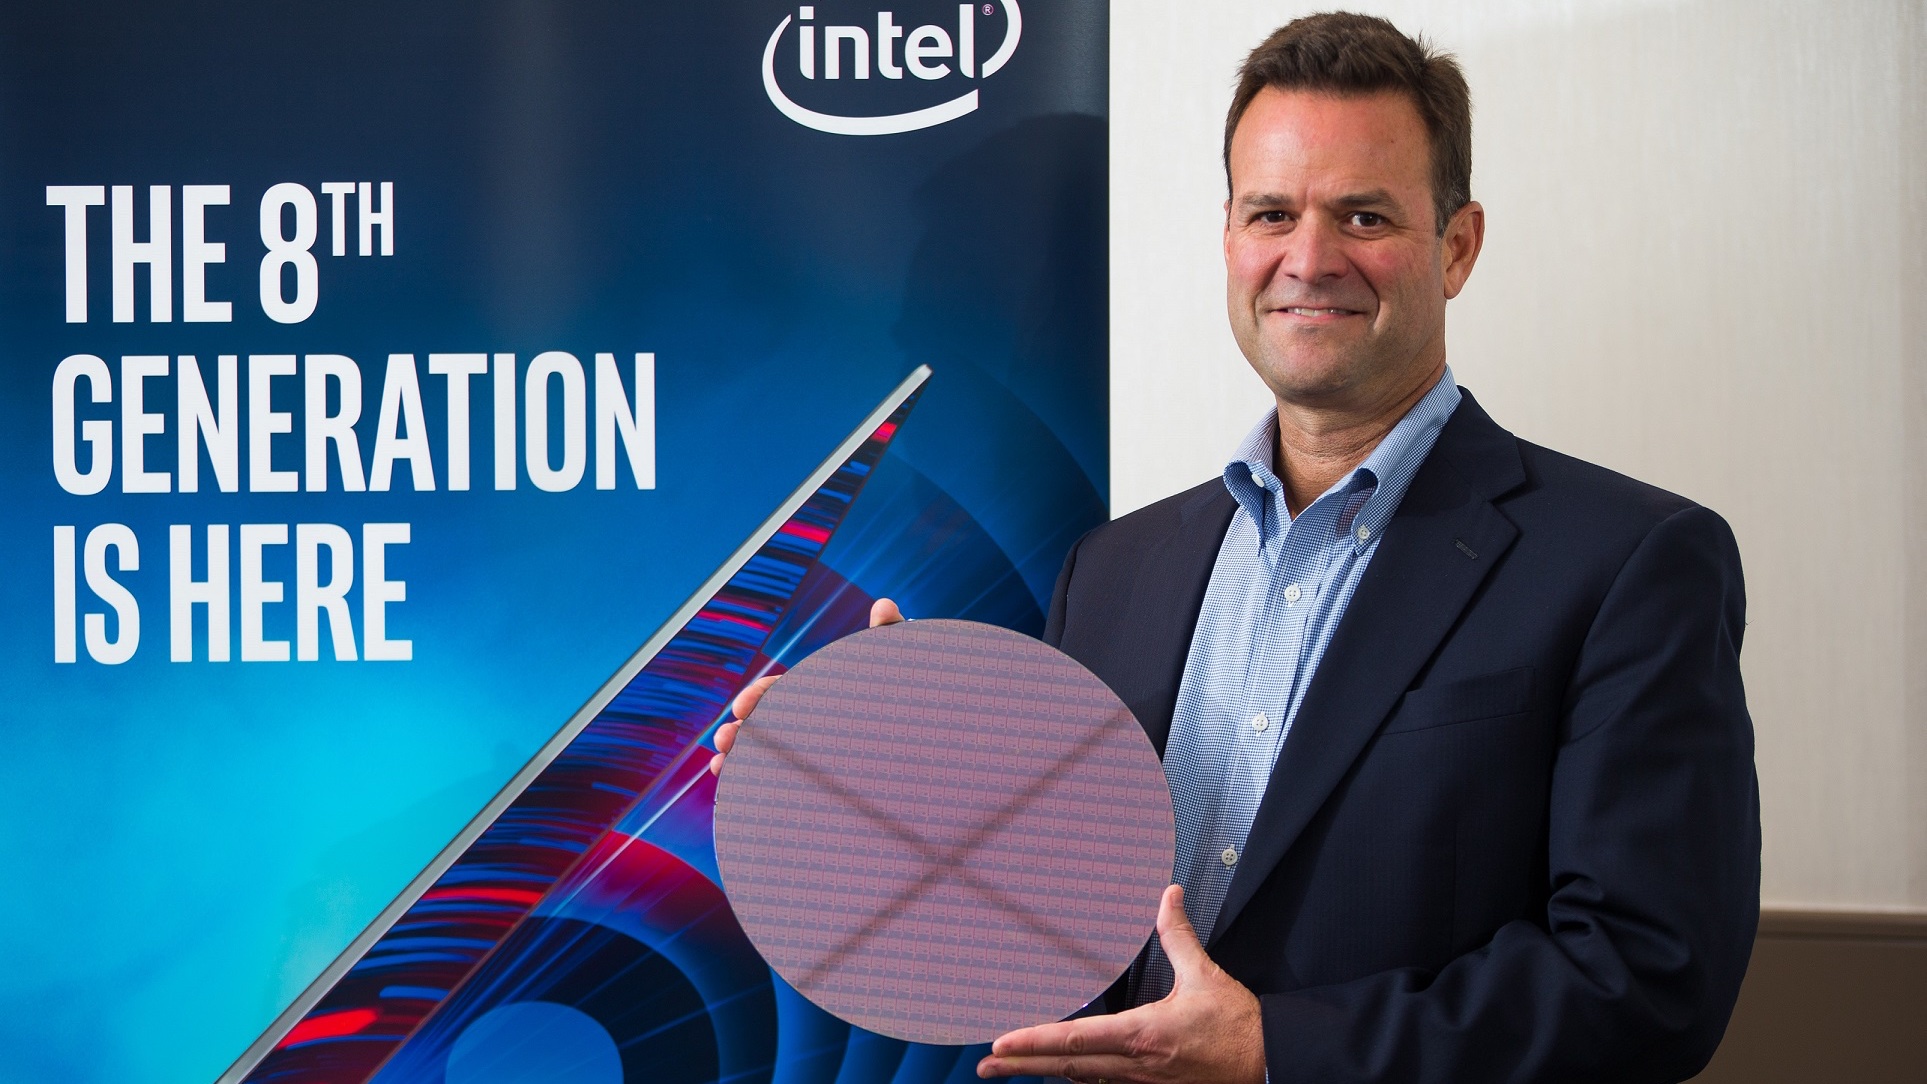 Intel's 8th-generation Core processors landed in 2017